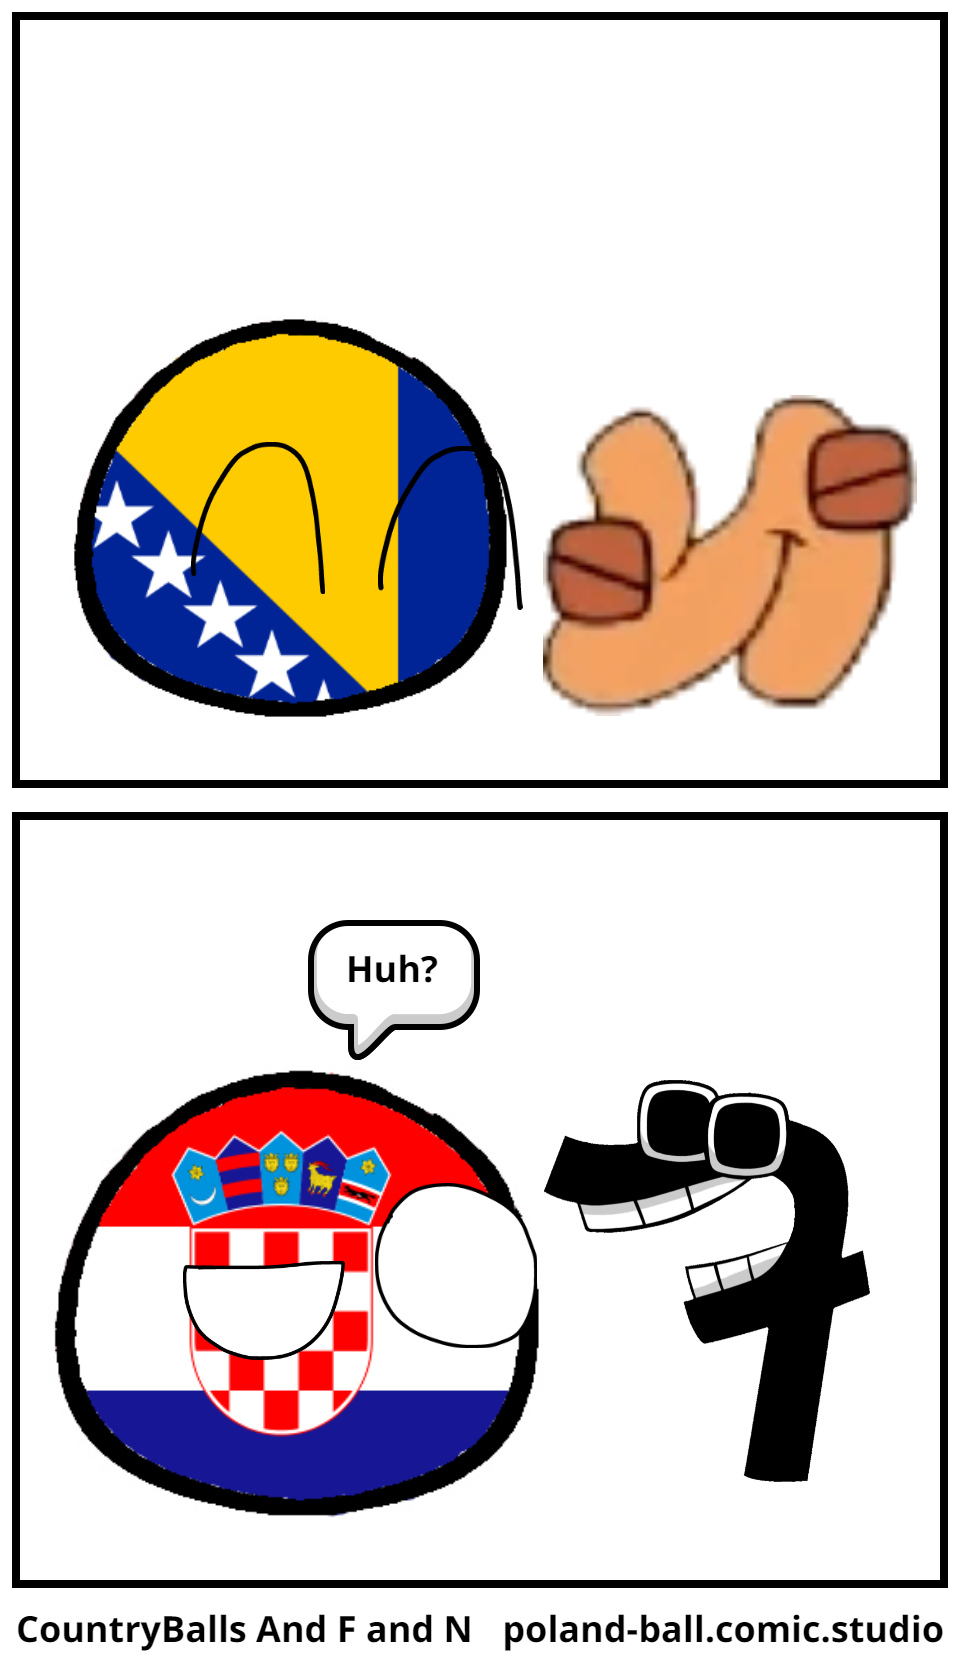 CountryBalls And F and N